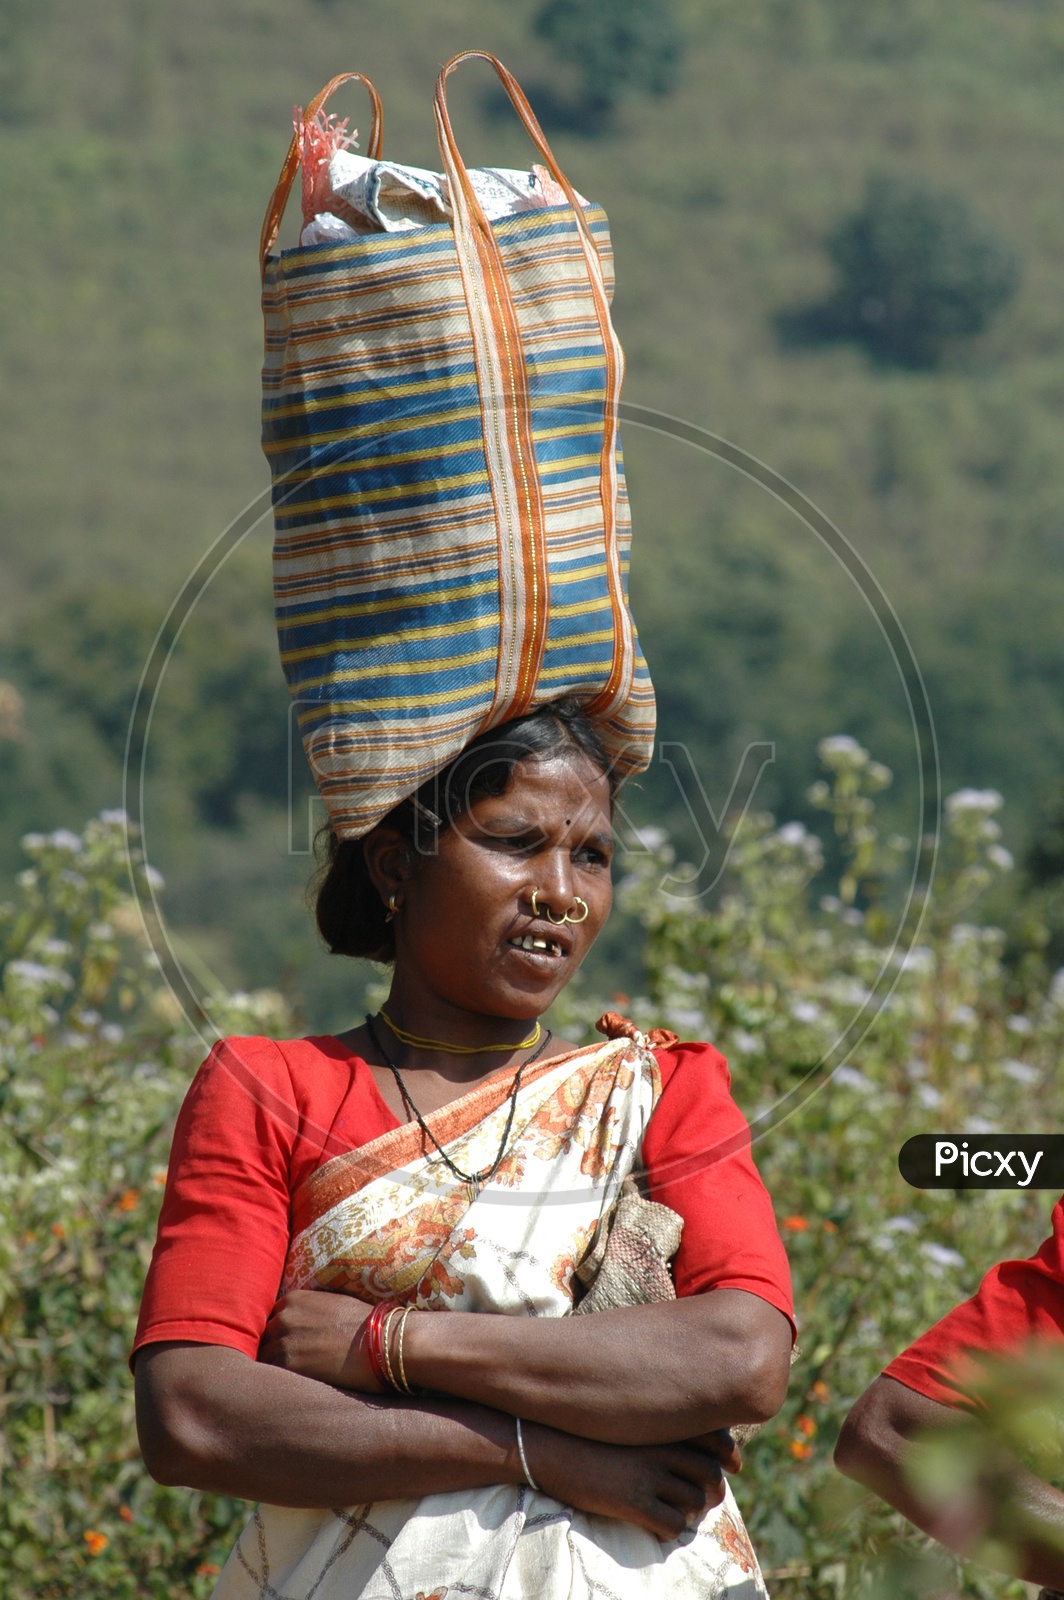 Tribal Woman in Villages With Weights On Head